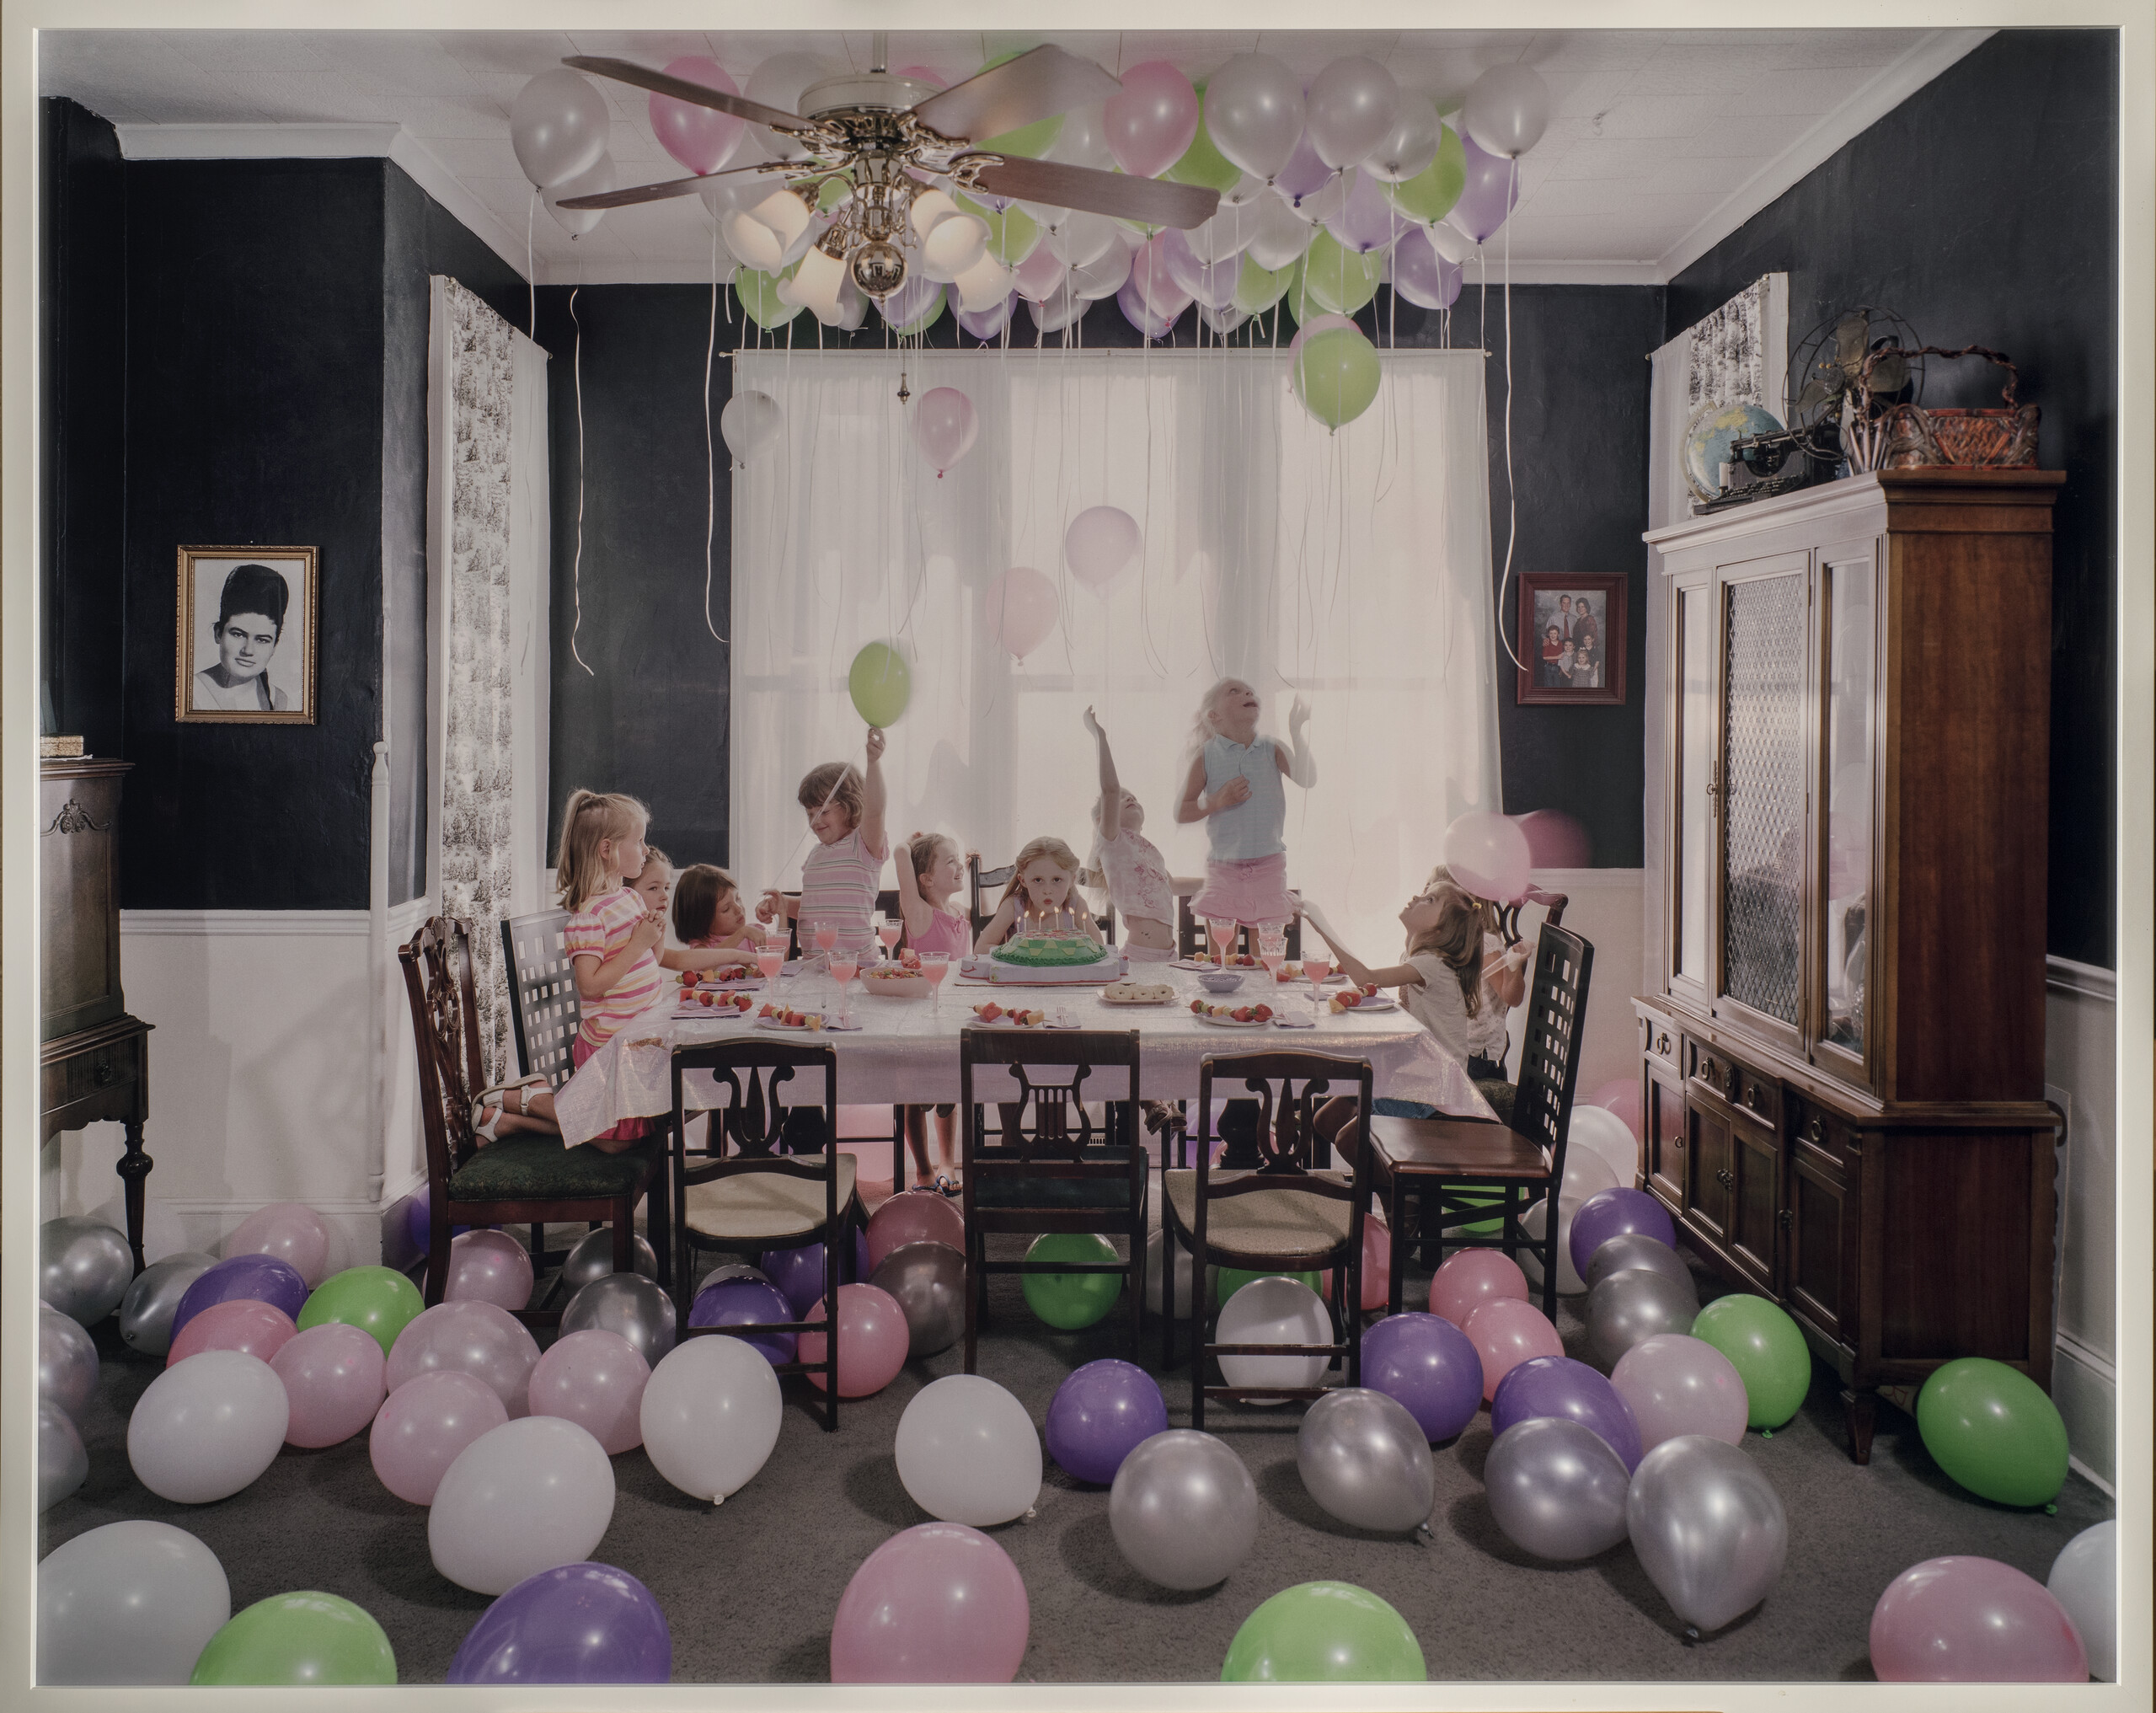 Green, purple, silver, white and pink balloons litter the floor and cover the ceiling of a navy-walled family dining room. In the middle of the room, a table is set with a pink table cloth. In the center of the table, a young girl blows out the candles on her birthday cake while looking straight ahead. Around her, nine other young girls jump, spin, and play.